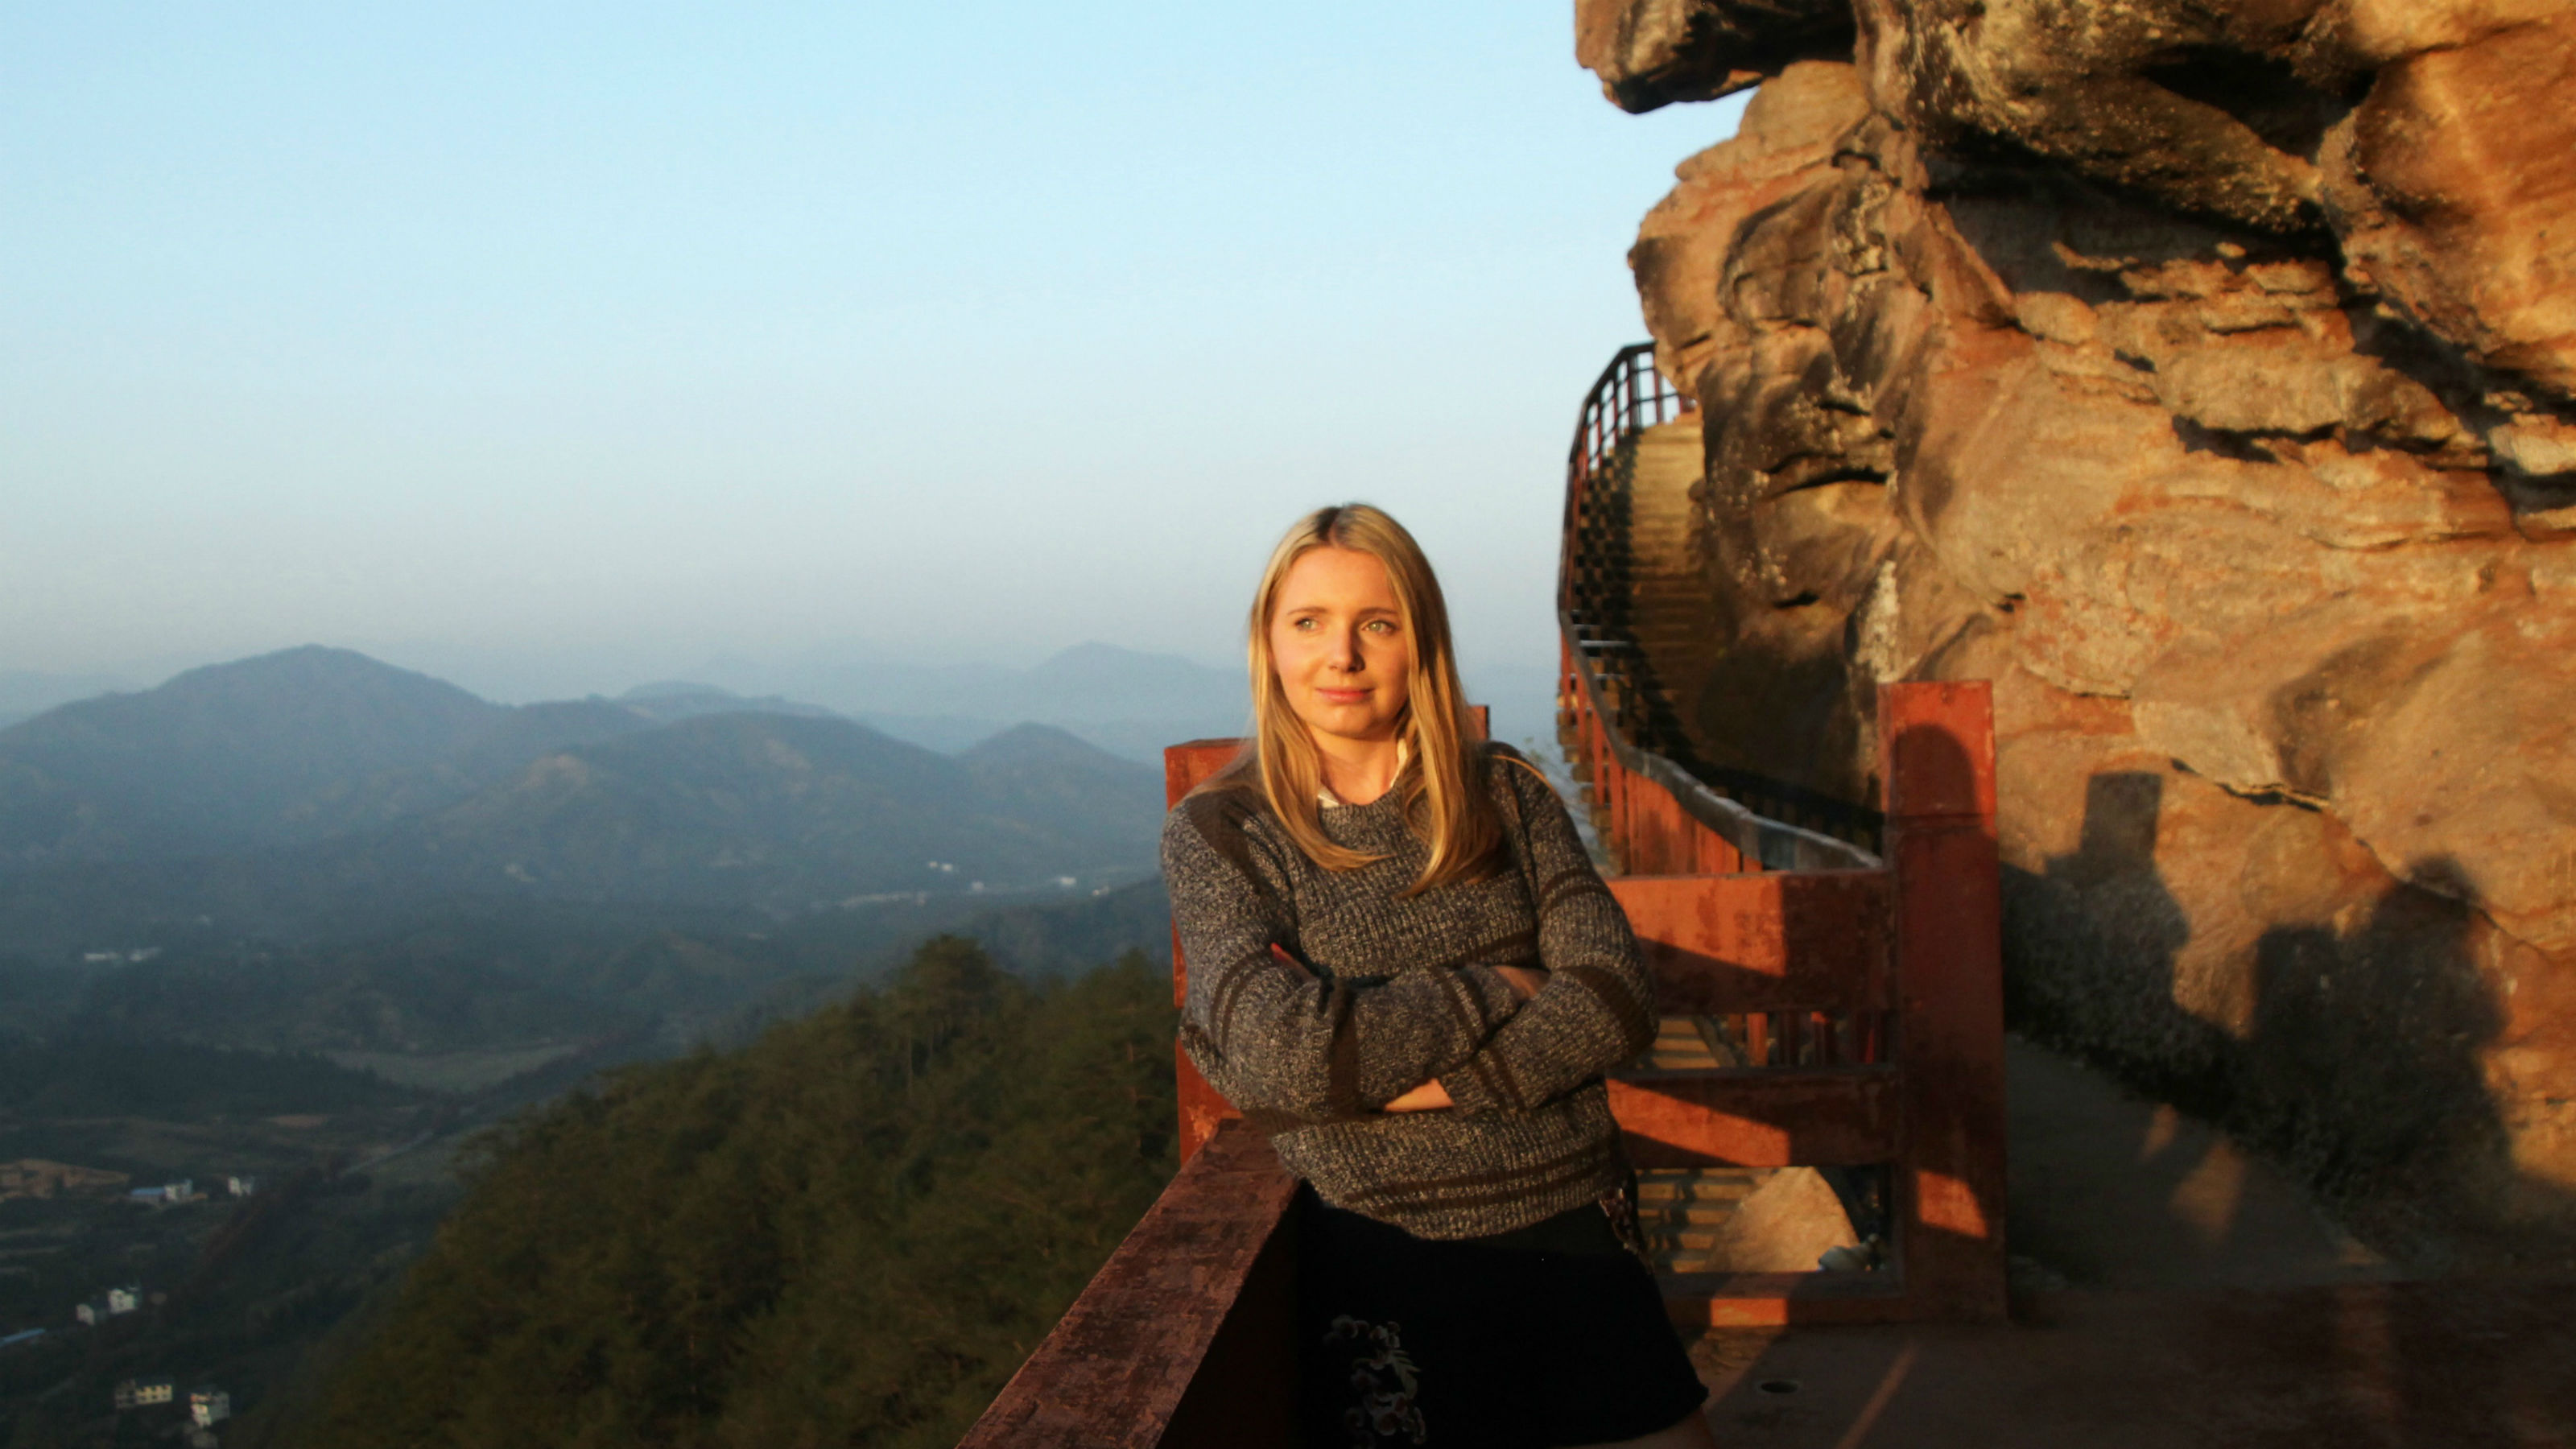 Kate, a Victoria student, standing on a rocky mountainside in China.